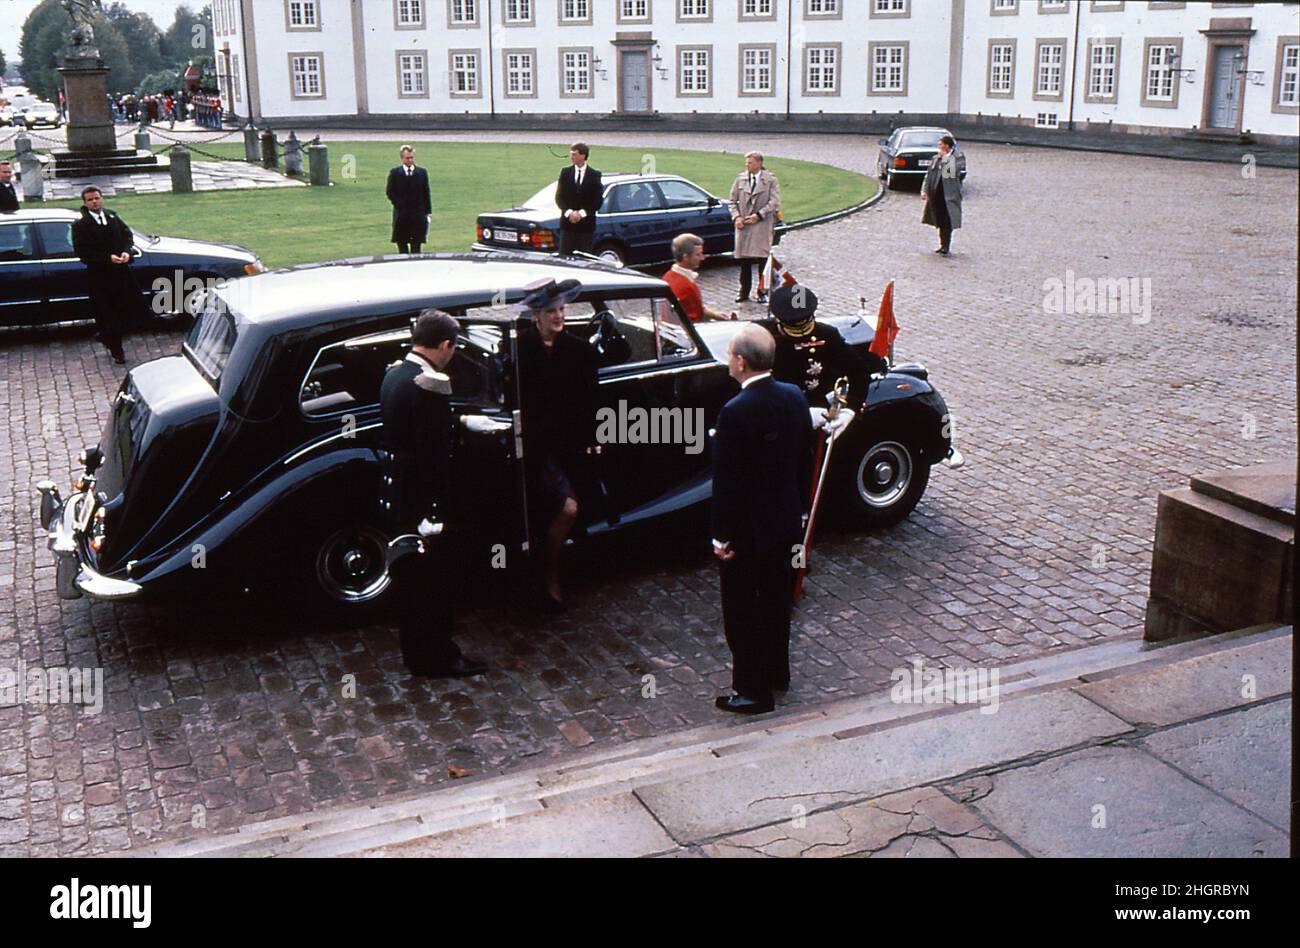 Fredensborg/Denmark./28 October 1991/. M.H.The Queen Margrethe II of Denamrk arrives at Fredensborg Palace in north sjaeland danish royal summer residence in Fredensborg.   (Photo..Francis Joseph Dean/Dean Pictures) Stock Photo